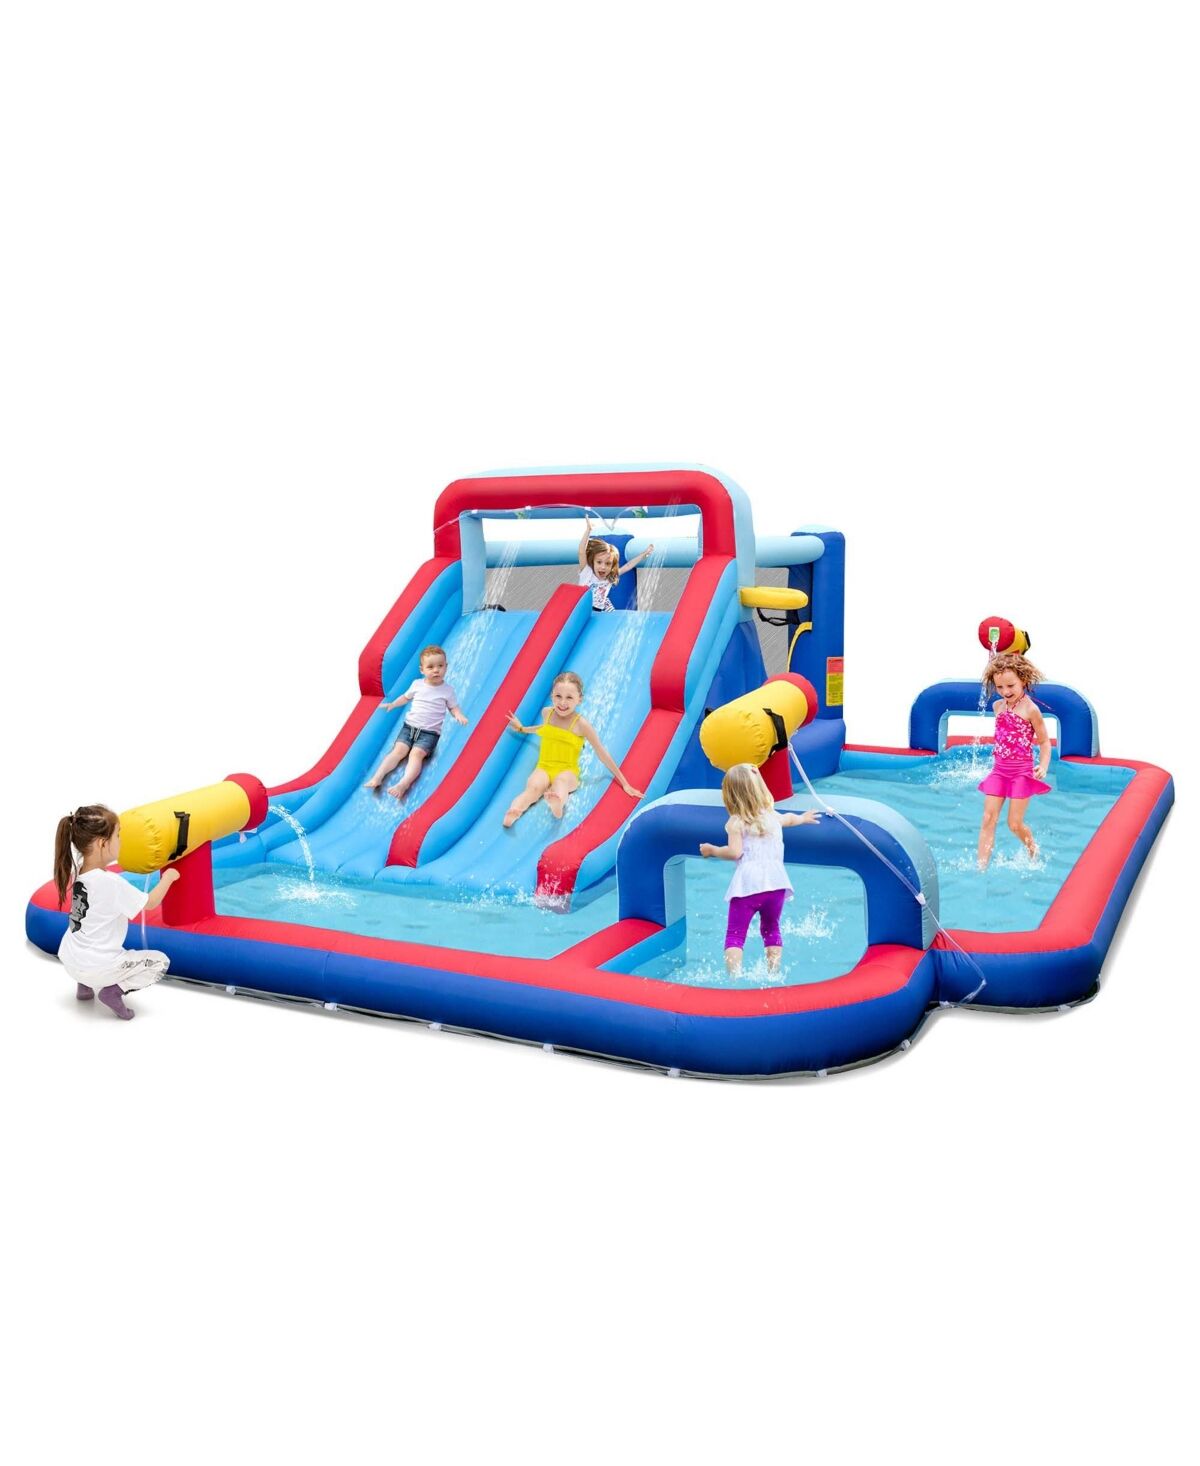 Costway Inflatable Water Slide Park Kids Bounce House Climbing Jumping without Blower - Blue